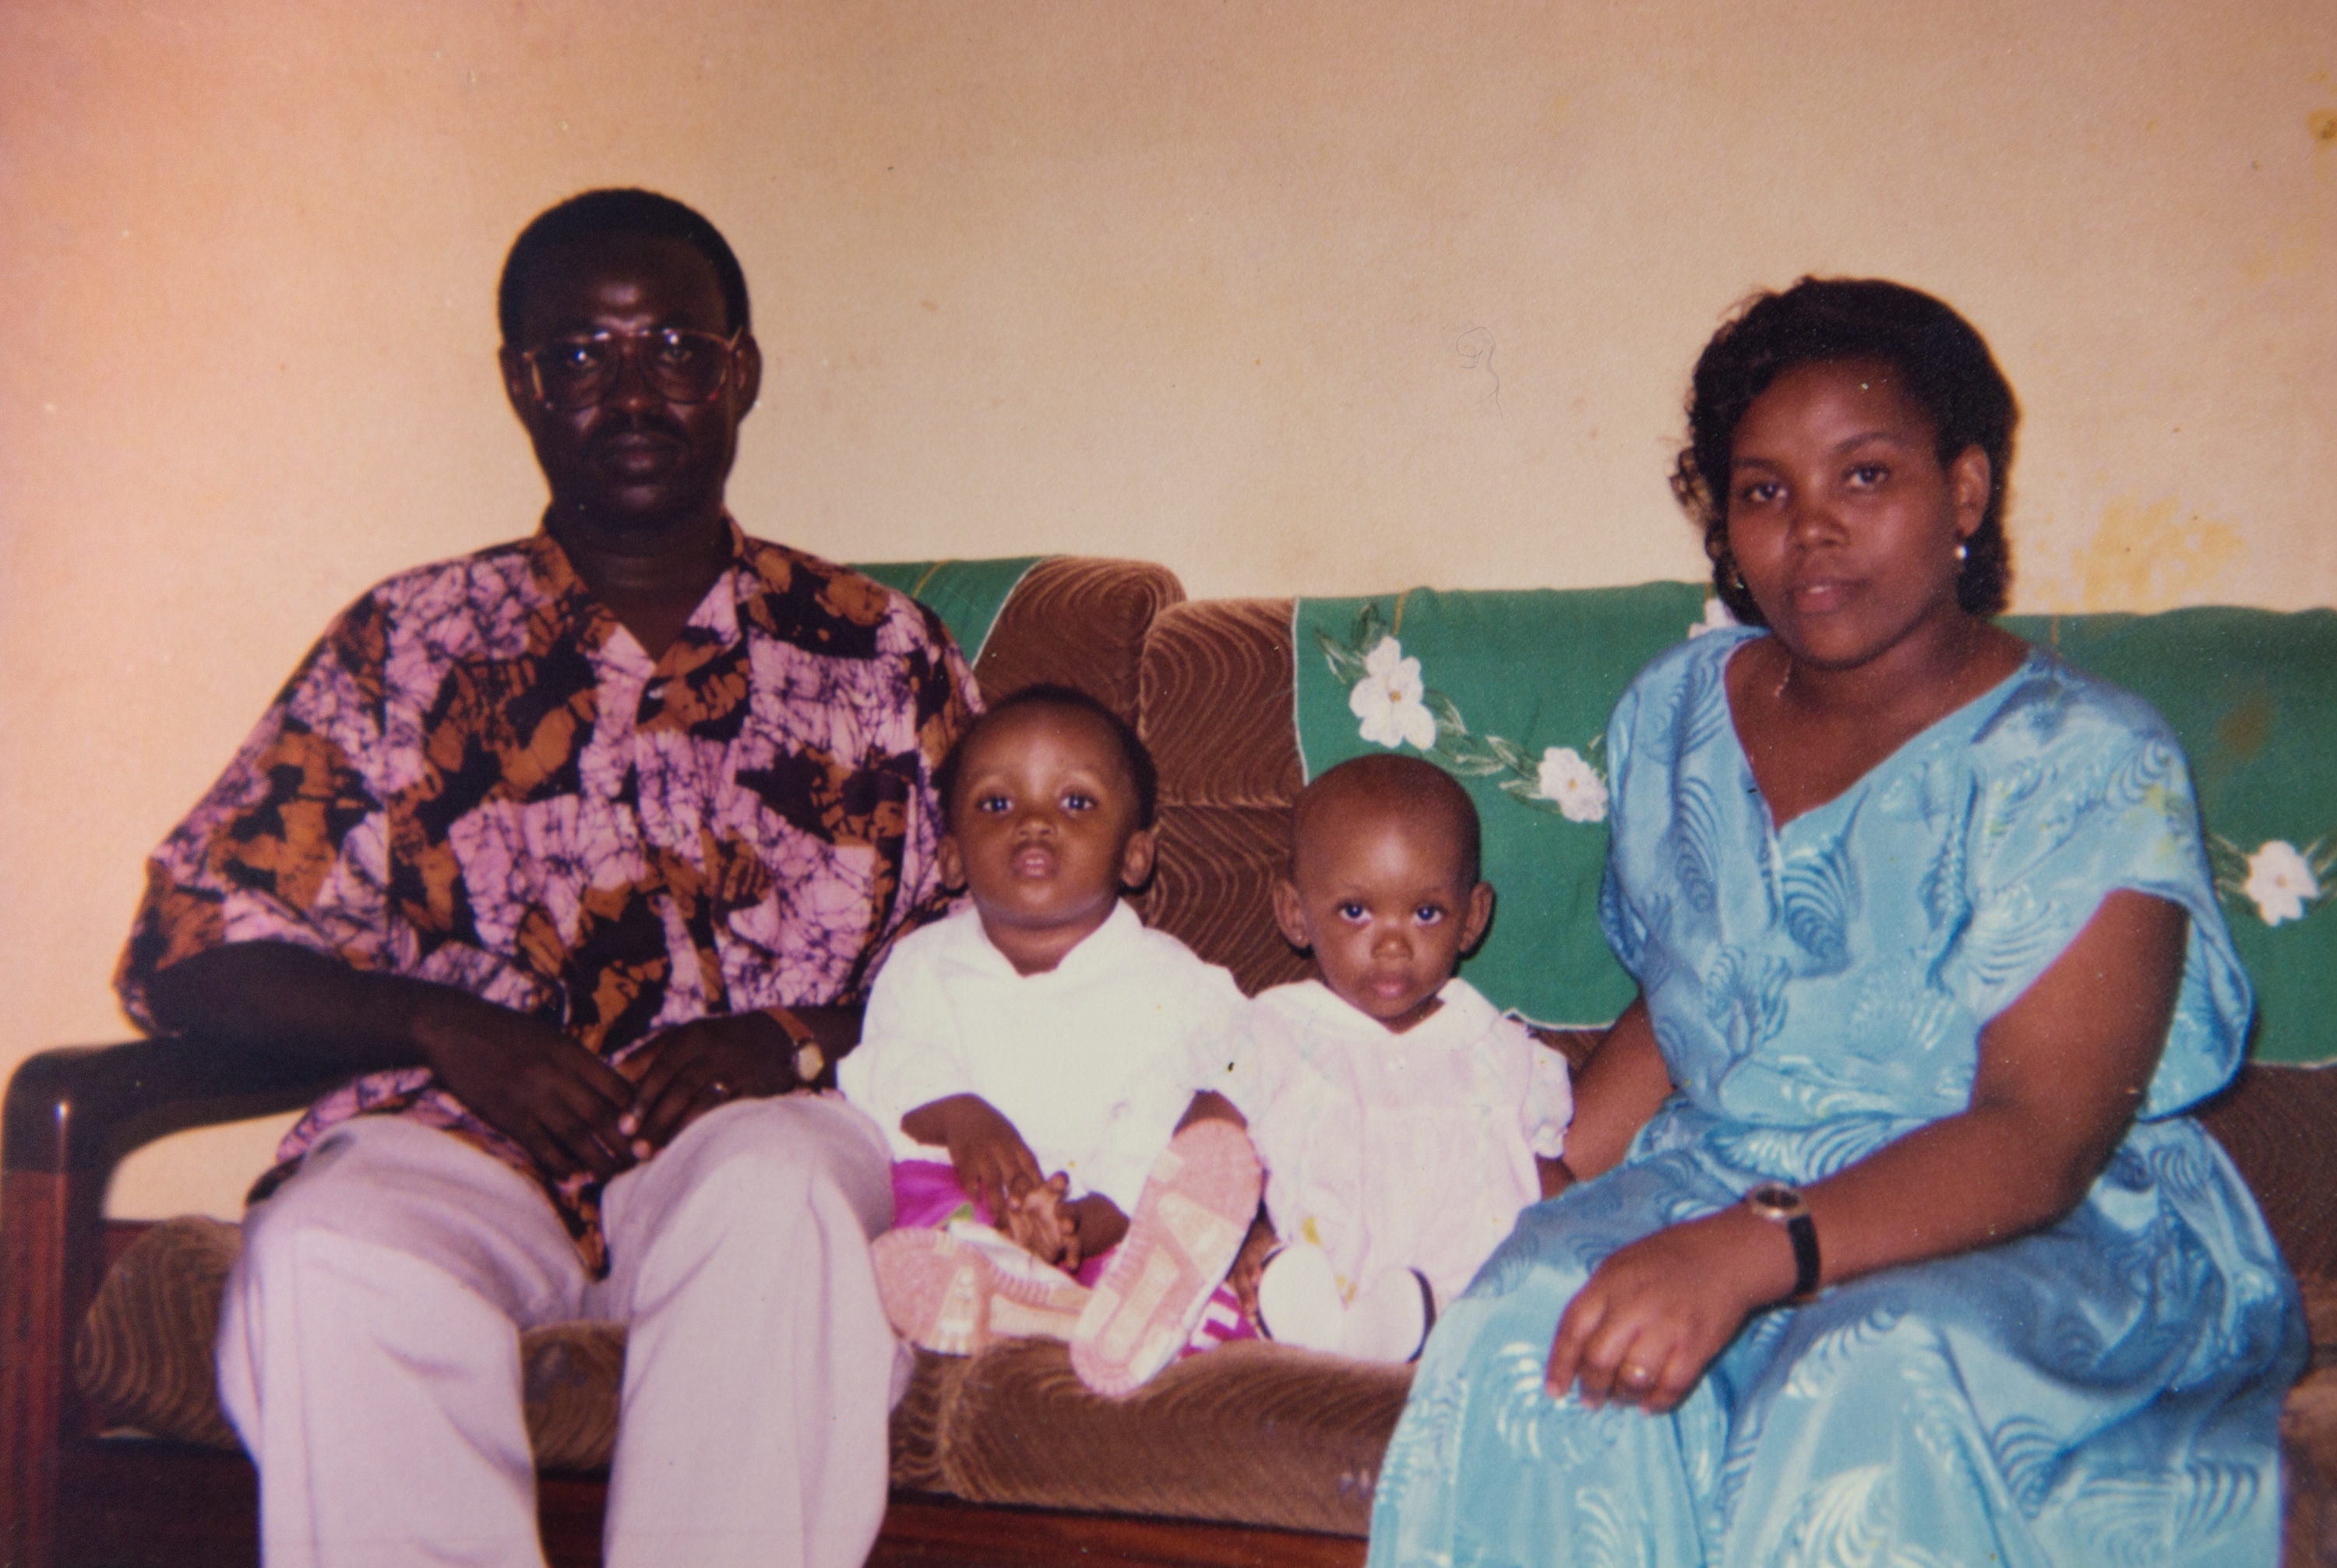 Marie Ntawizera, her husband and her two daughters sitting on a couch.